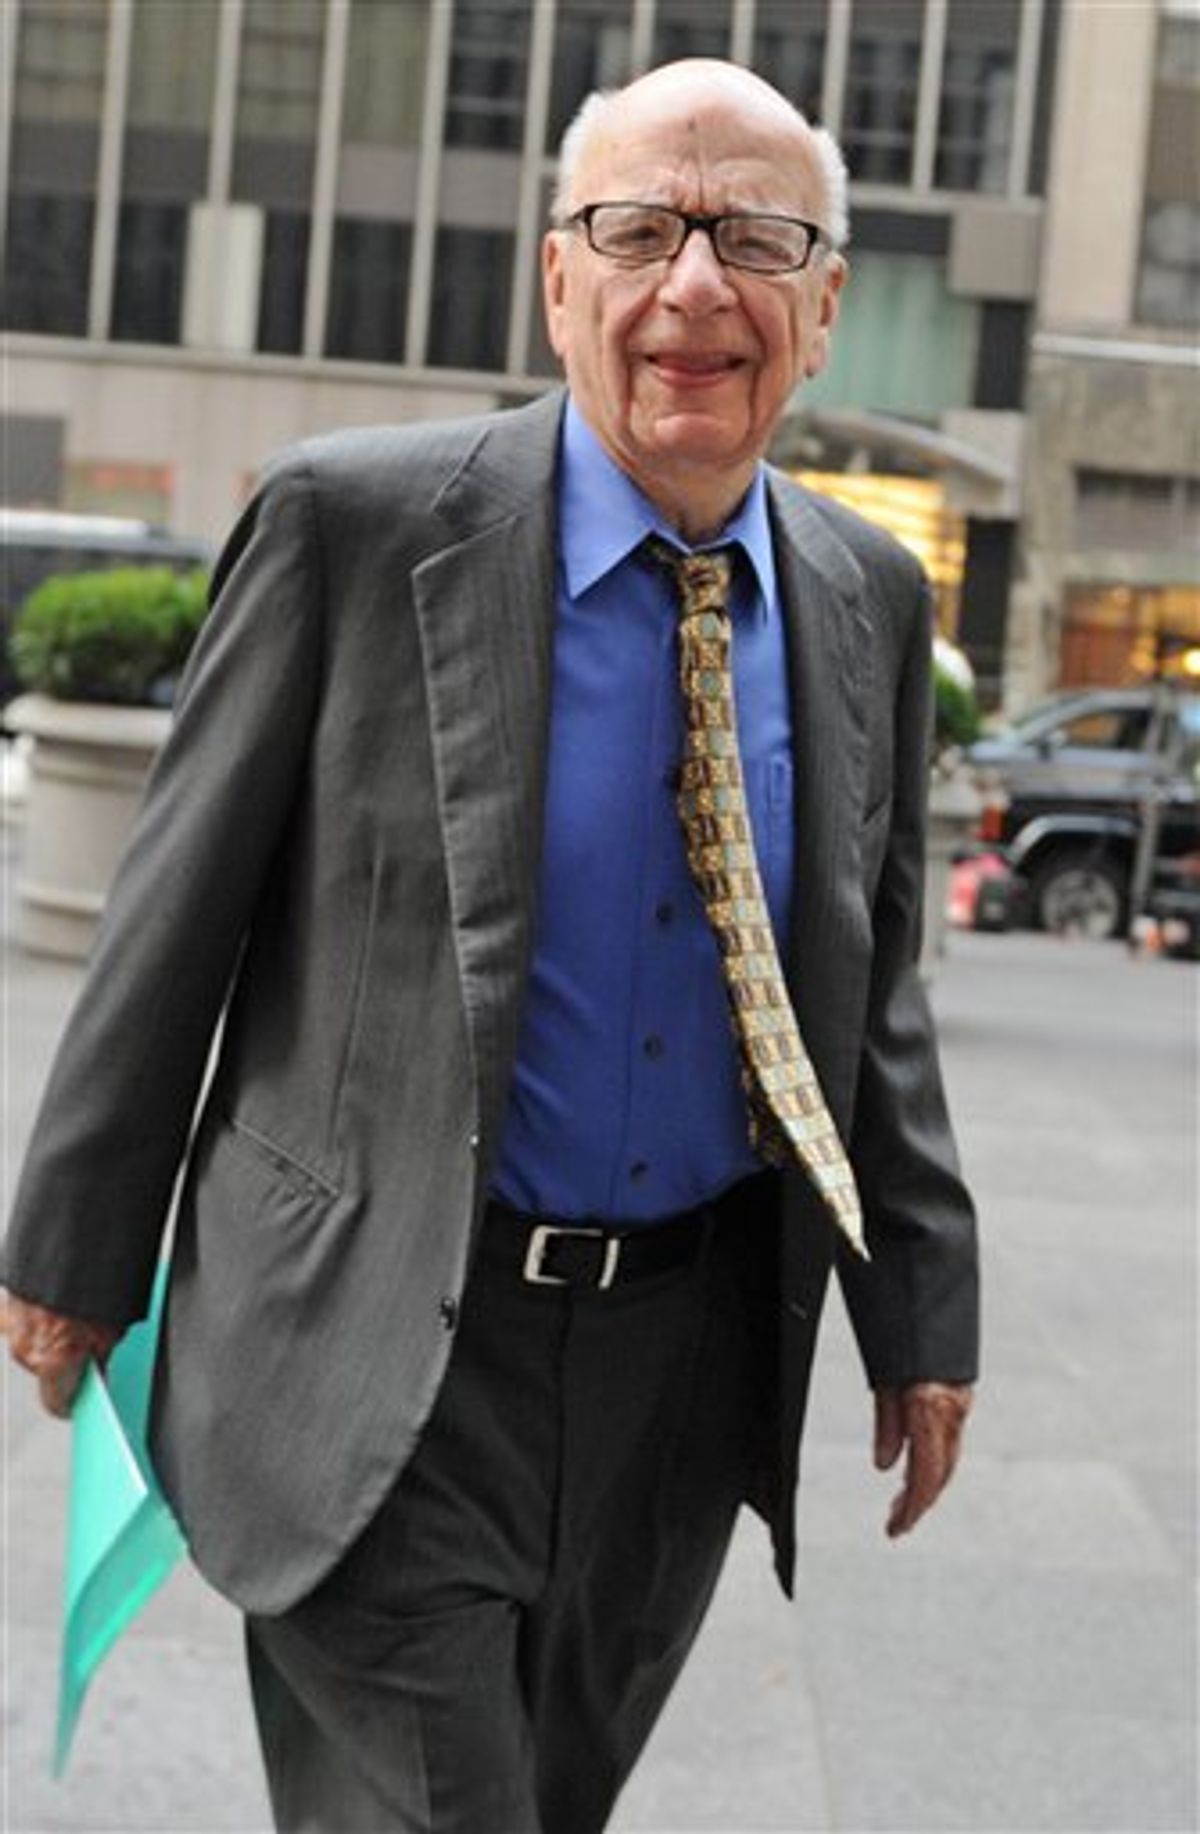 FILE - In this July 22, 2011 file photo, News Corporation head Rupert Murdoch enters the News Corp. building, in New York. News Corp. reports quarterly financial results Wednesday, Aug. 10, 2011, after the market close. (AP Photo/Louis Lanzano, File) (AP)